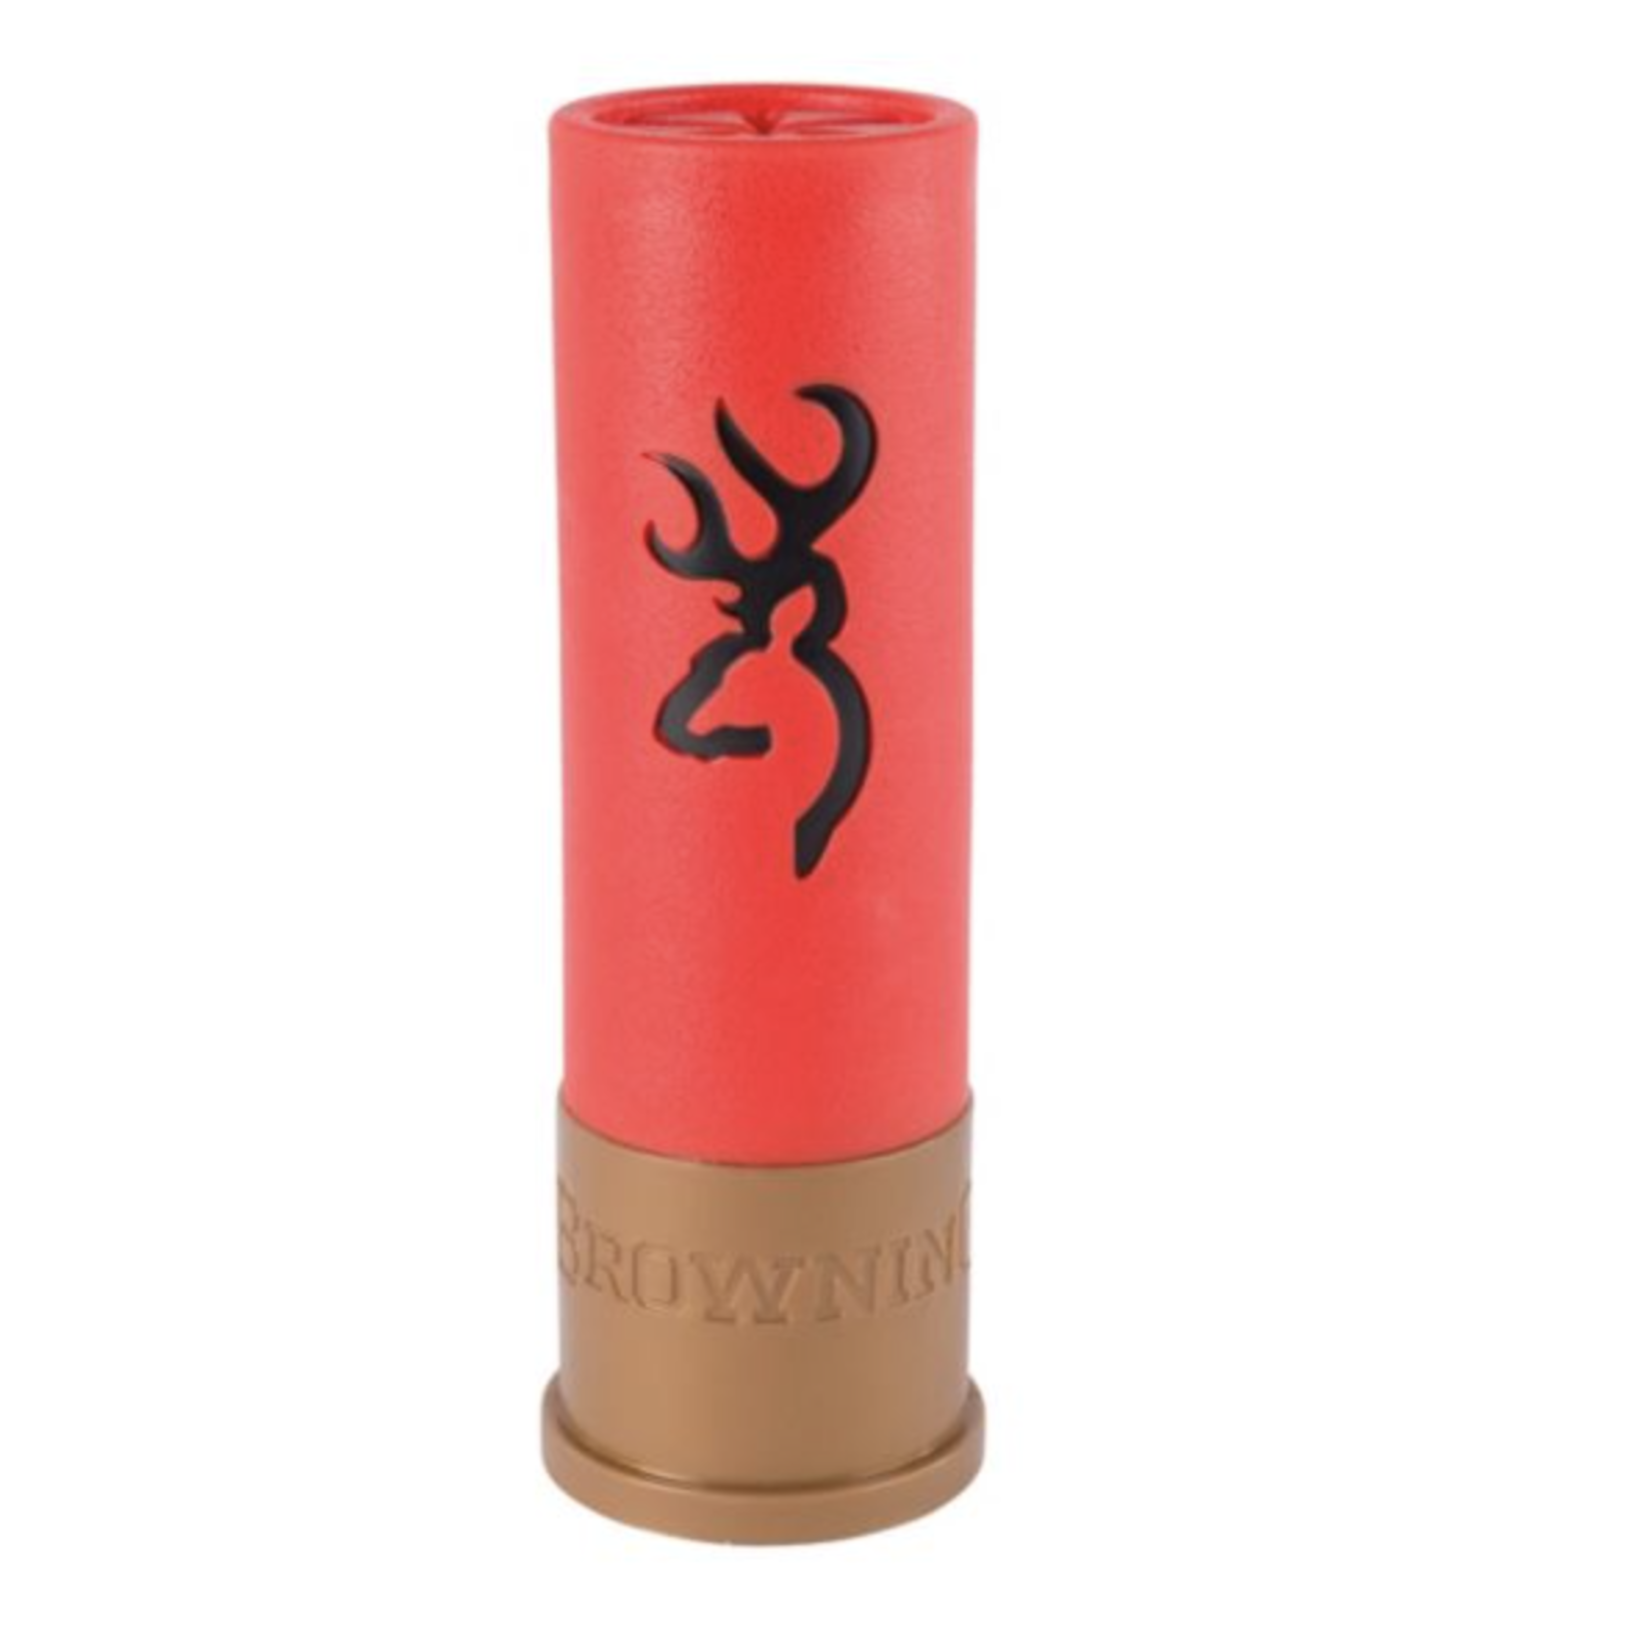 Browning Browning - Shot Shell Chew Toy